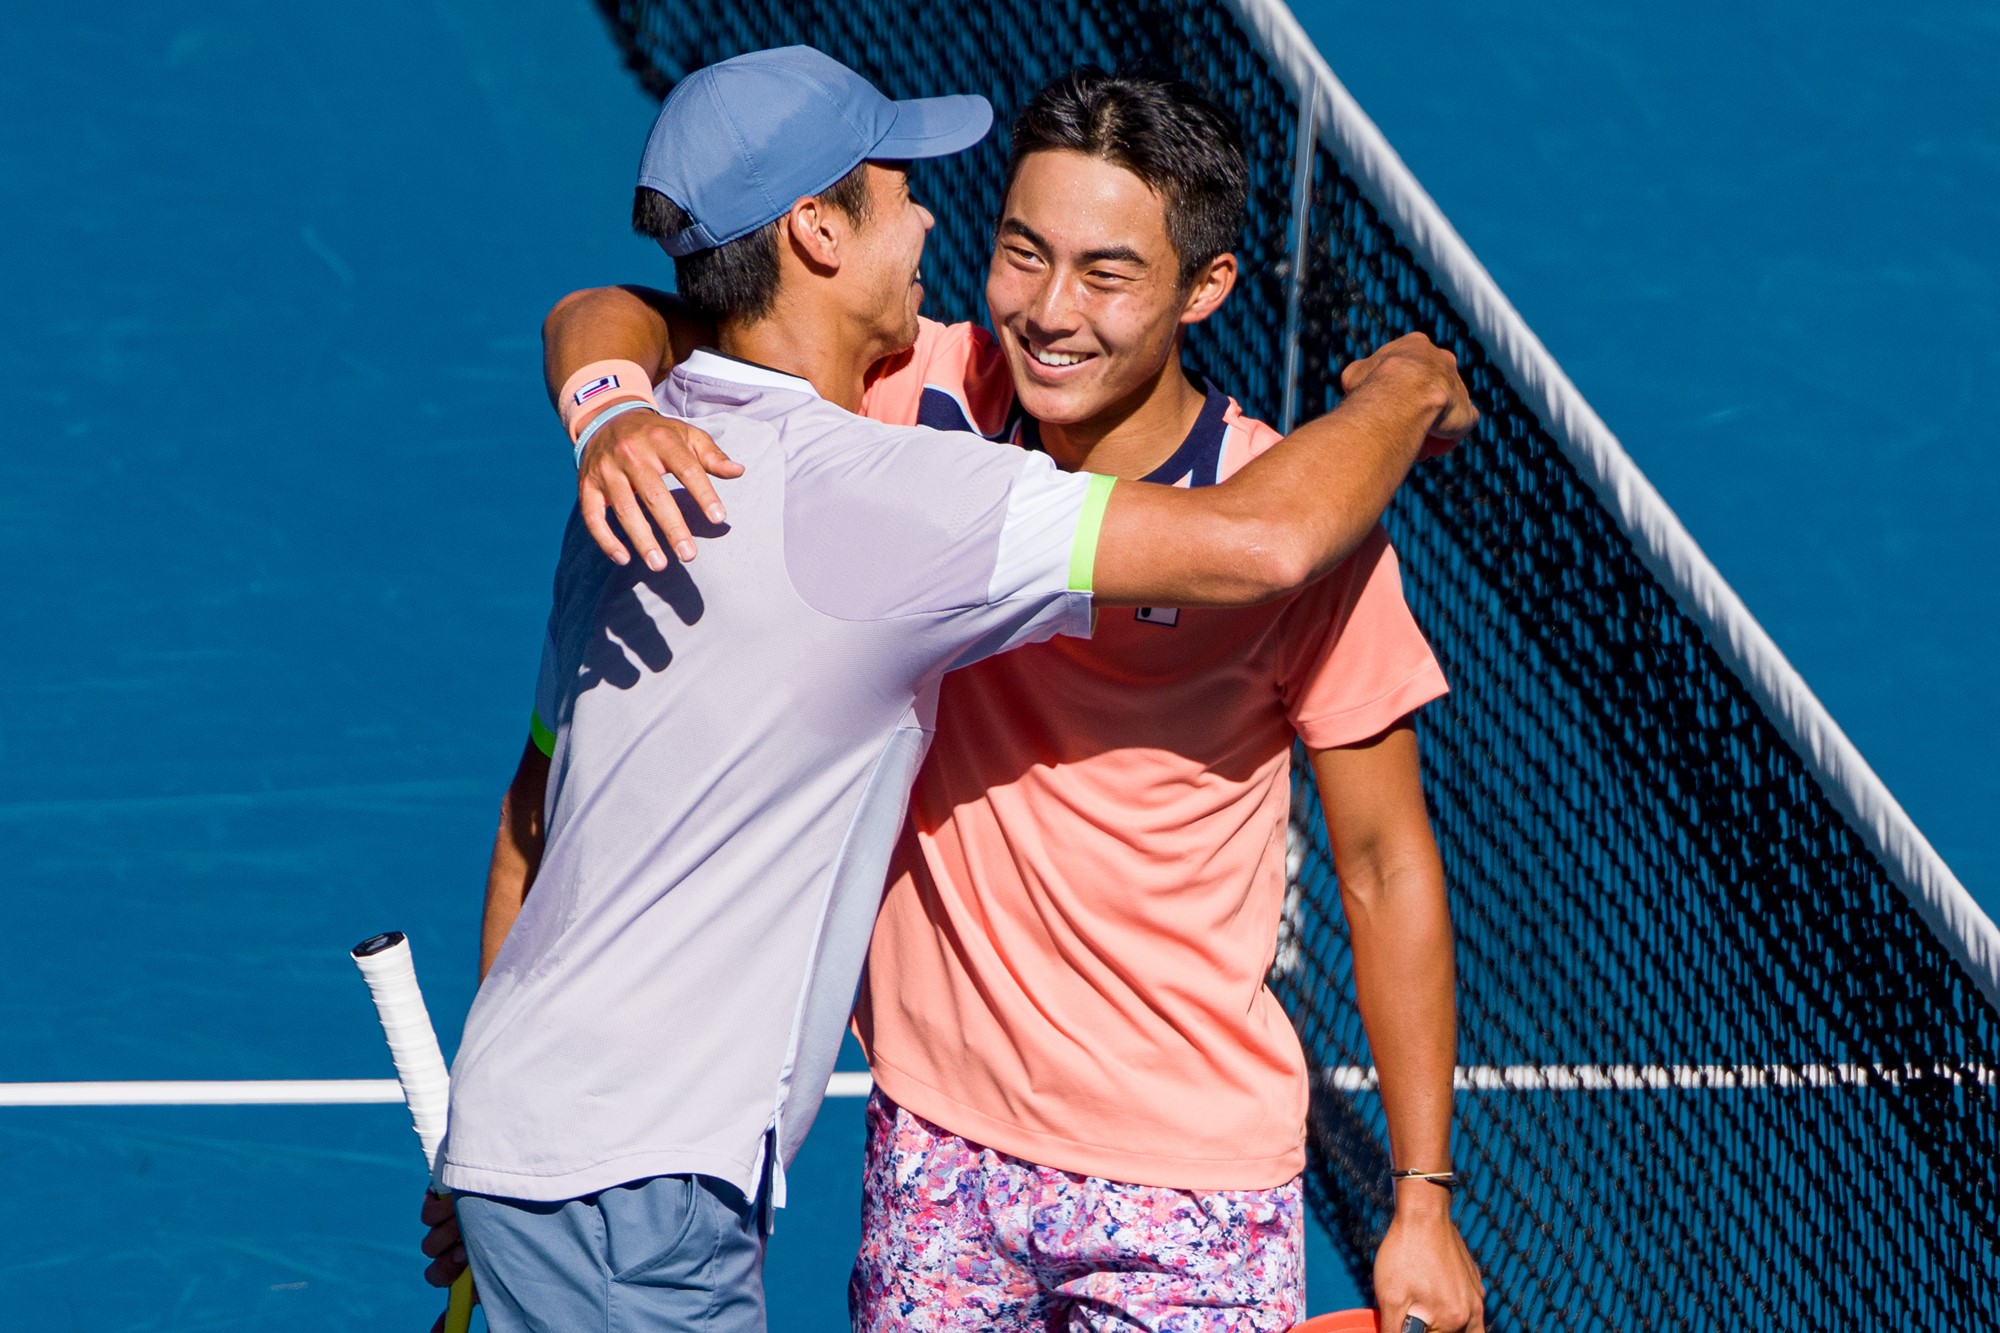 Two tennis plaayers embrace.